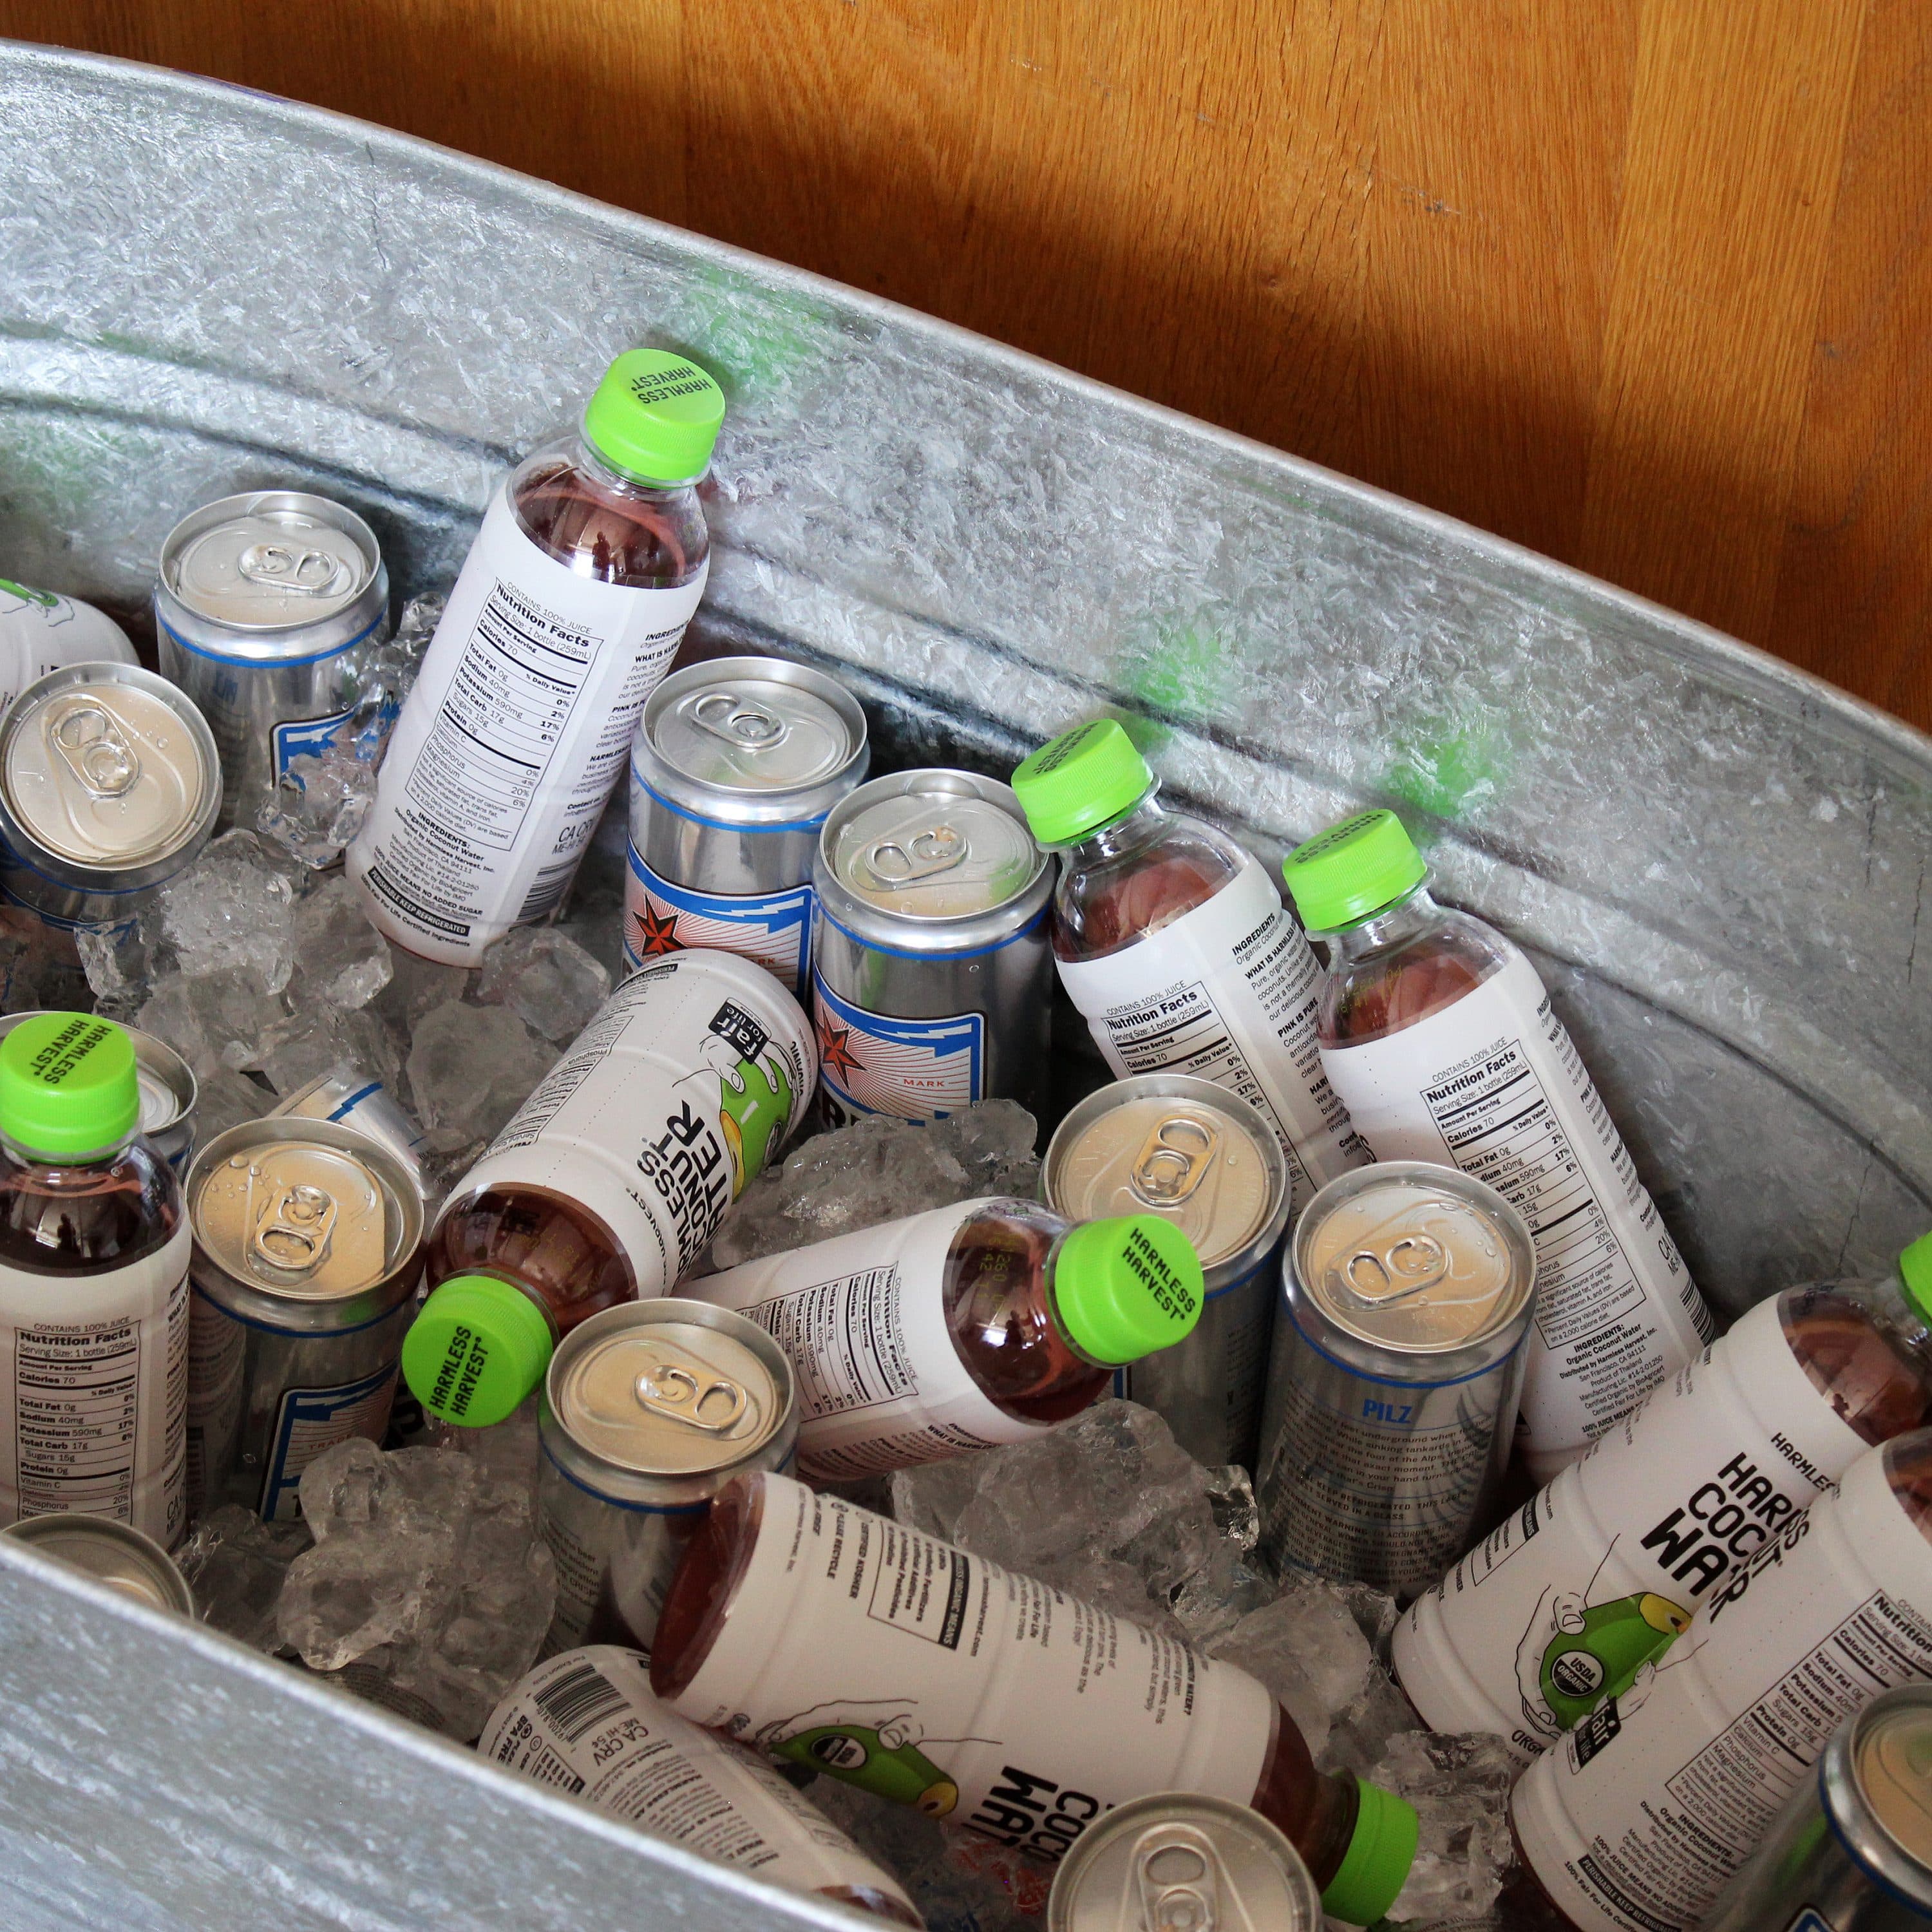 A large metal tub filled with ice, plastic bottles with green caps, and cans of sparkling water. The bottles and cans are chilled, ready for serving. The background features a wooden surface.